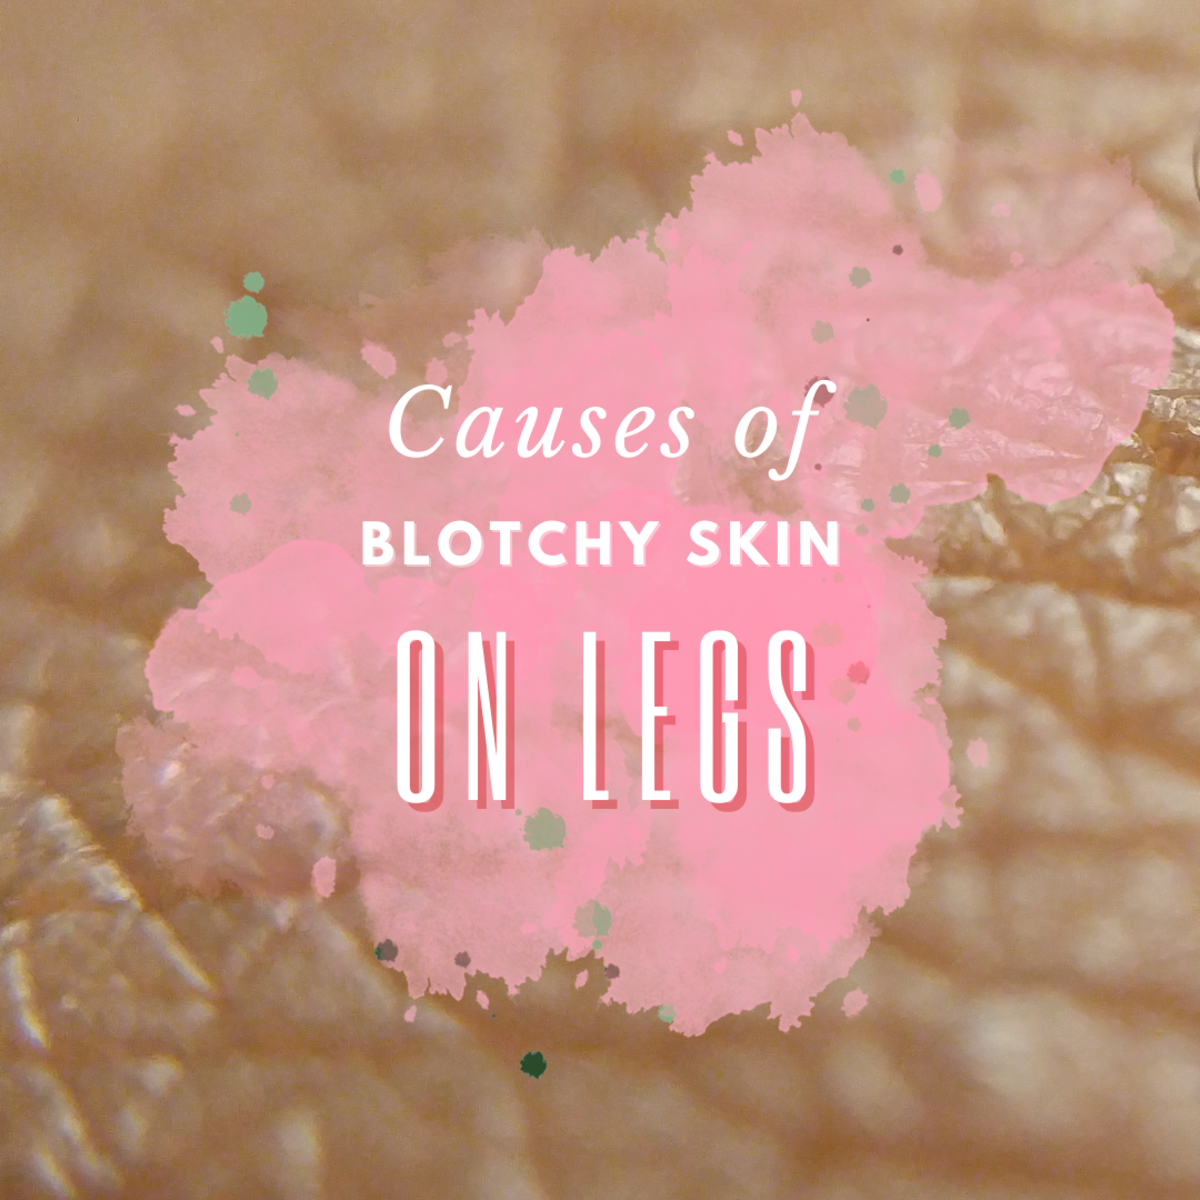 What Causes Blotchy Skin on Legs?